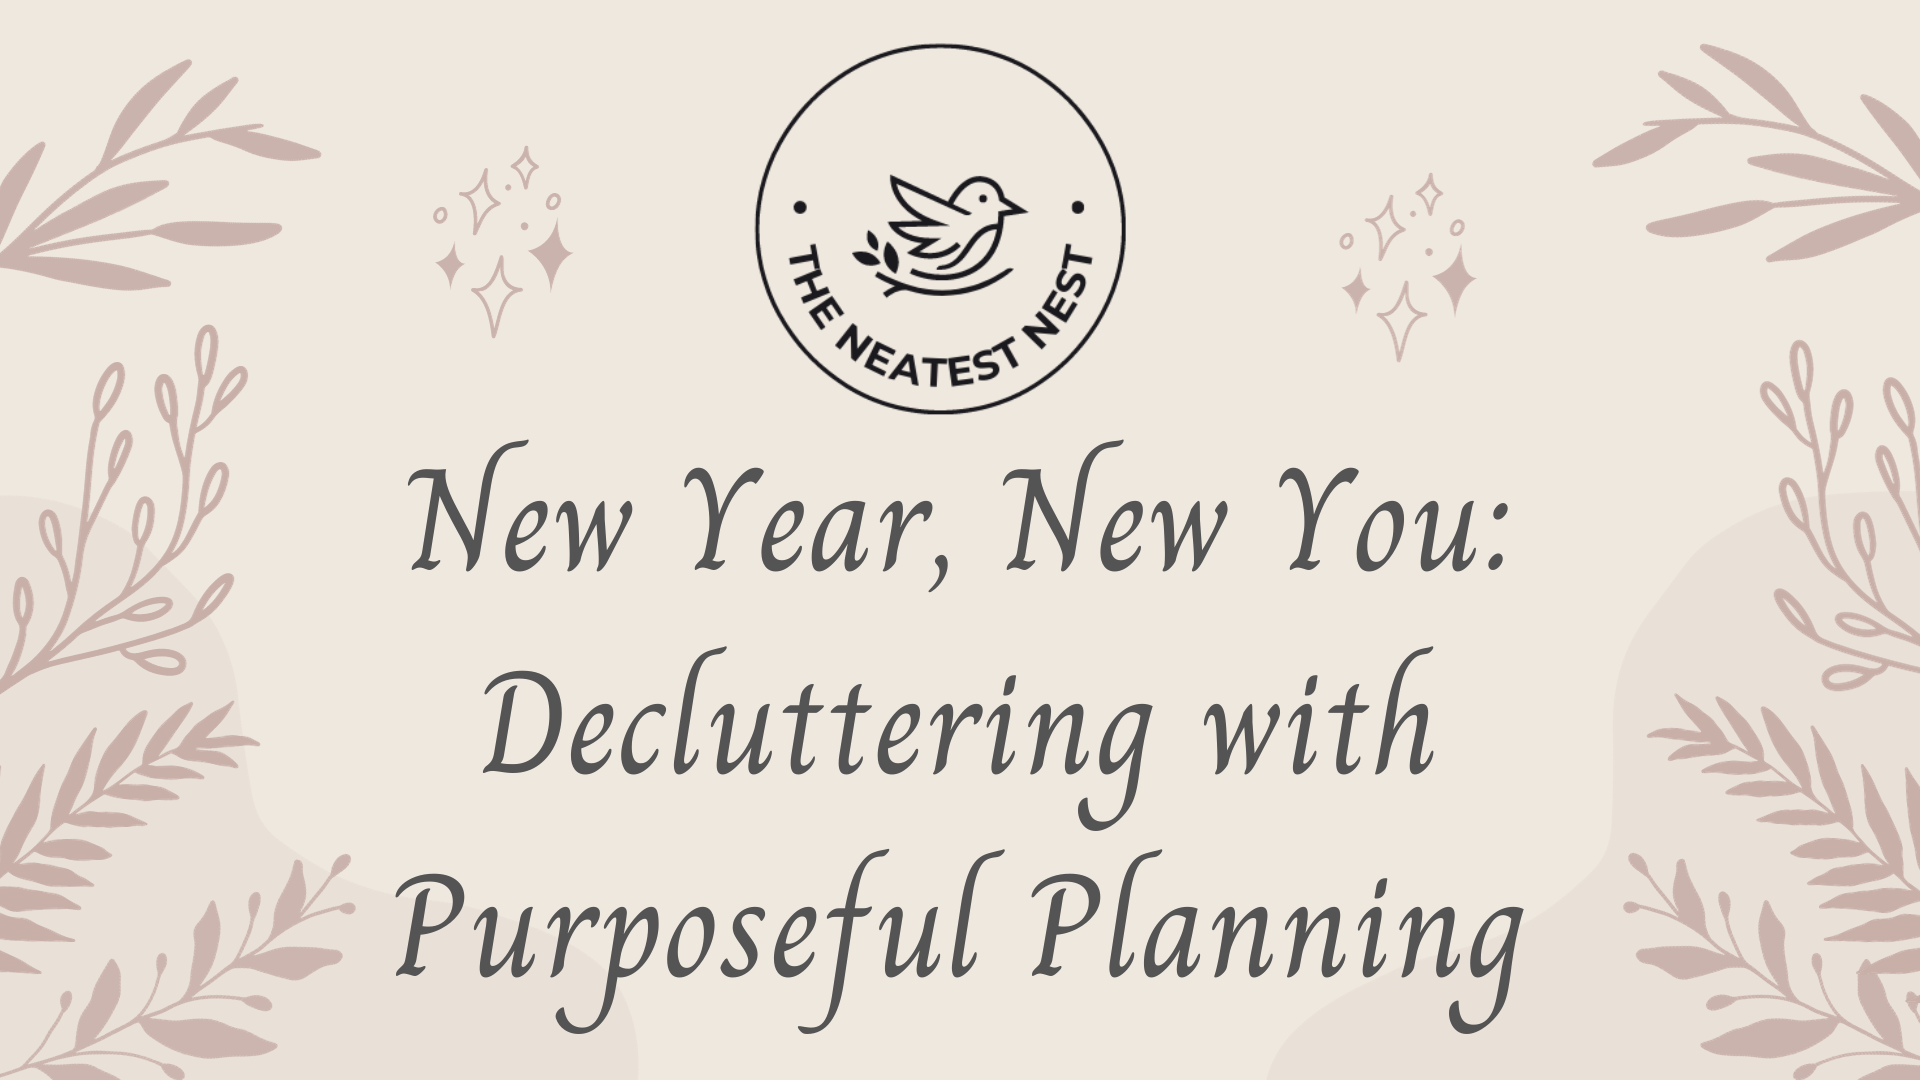 New Year, New You: Decluttering with Purposeful Planning